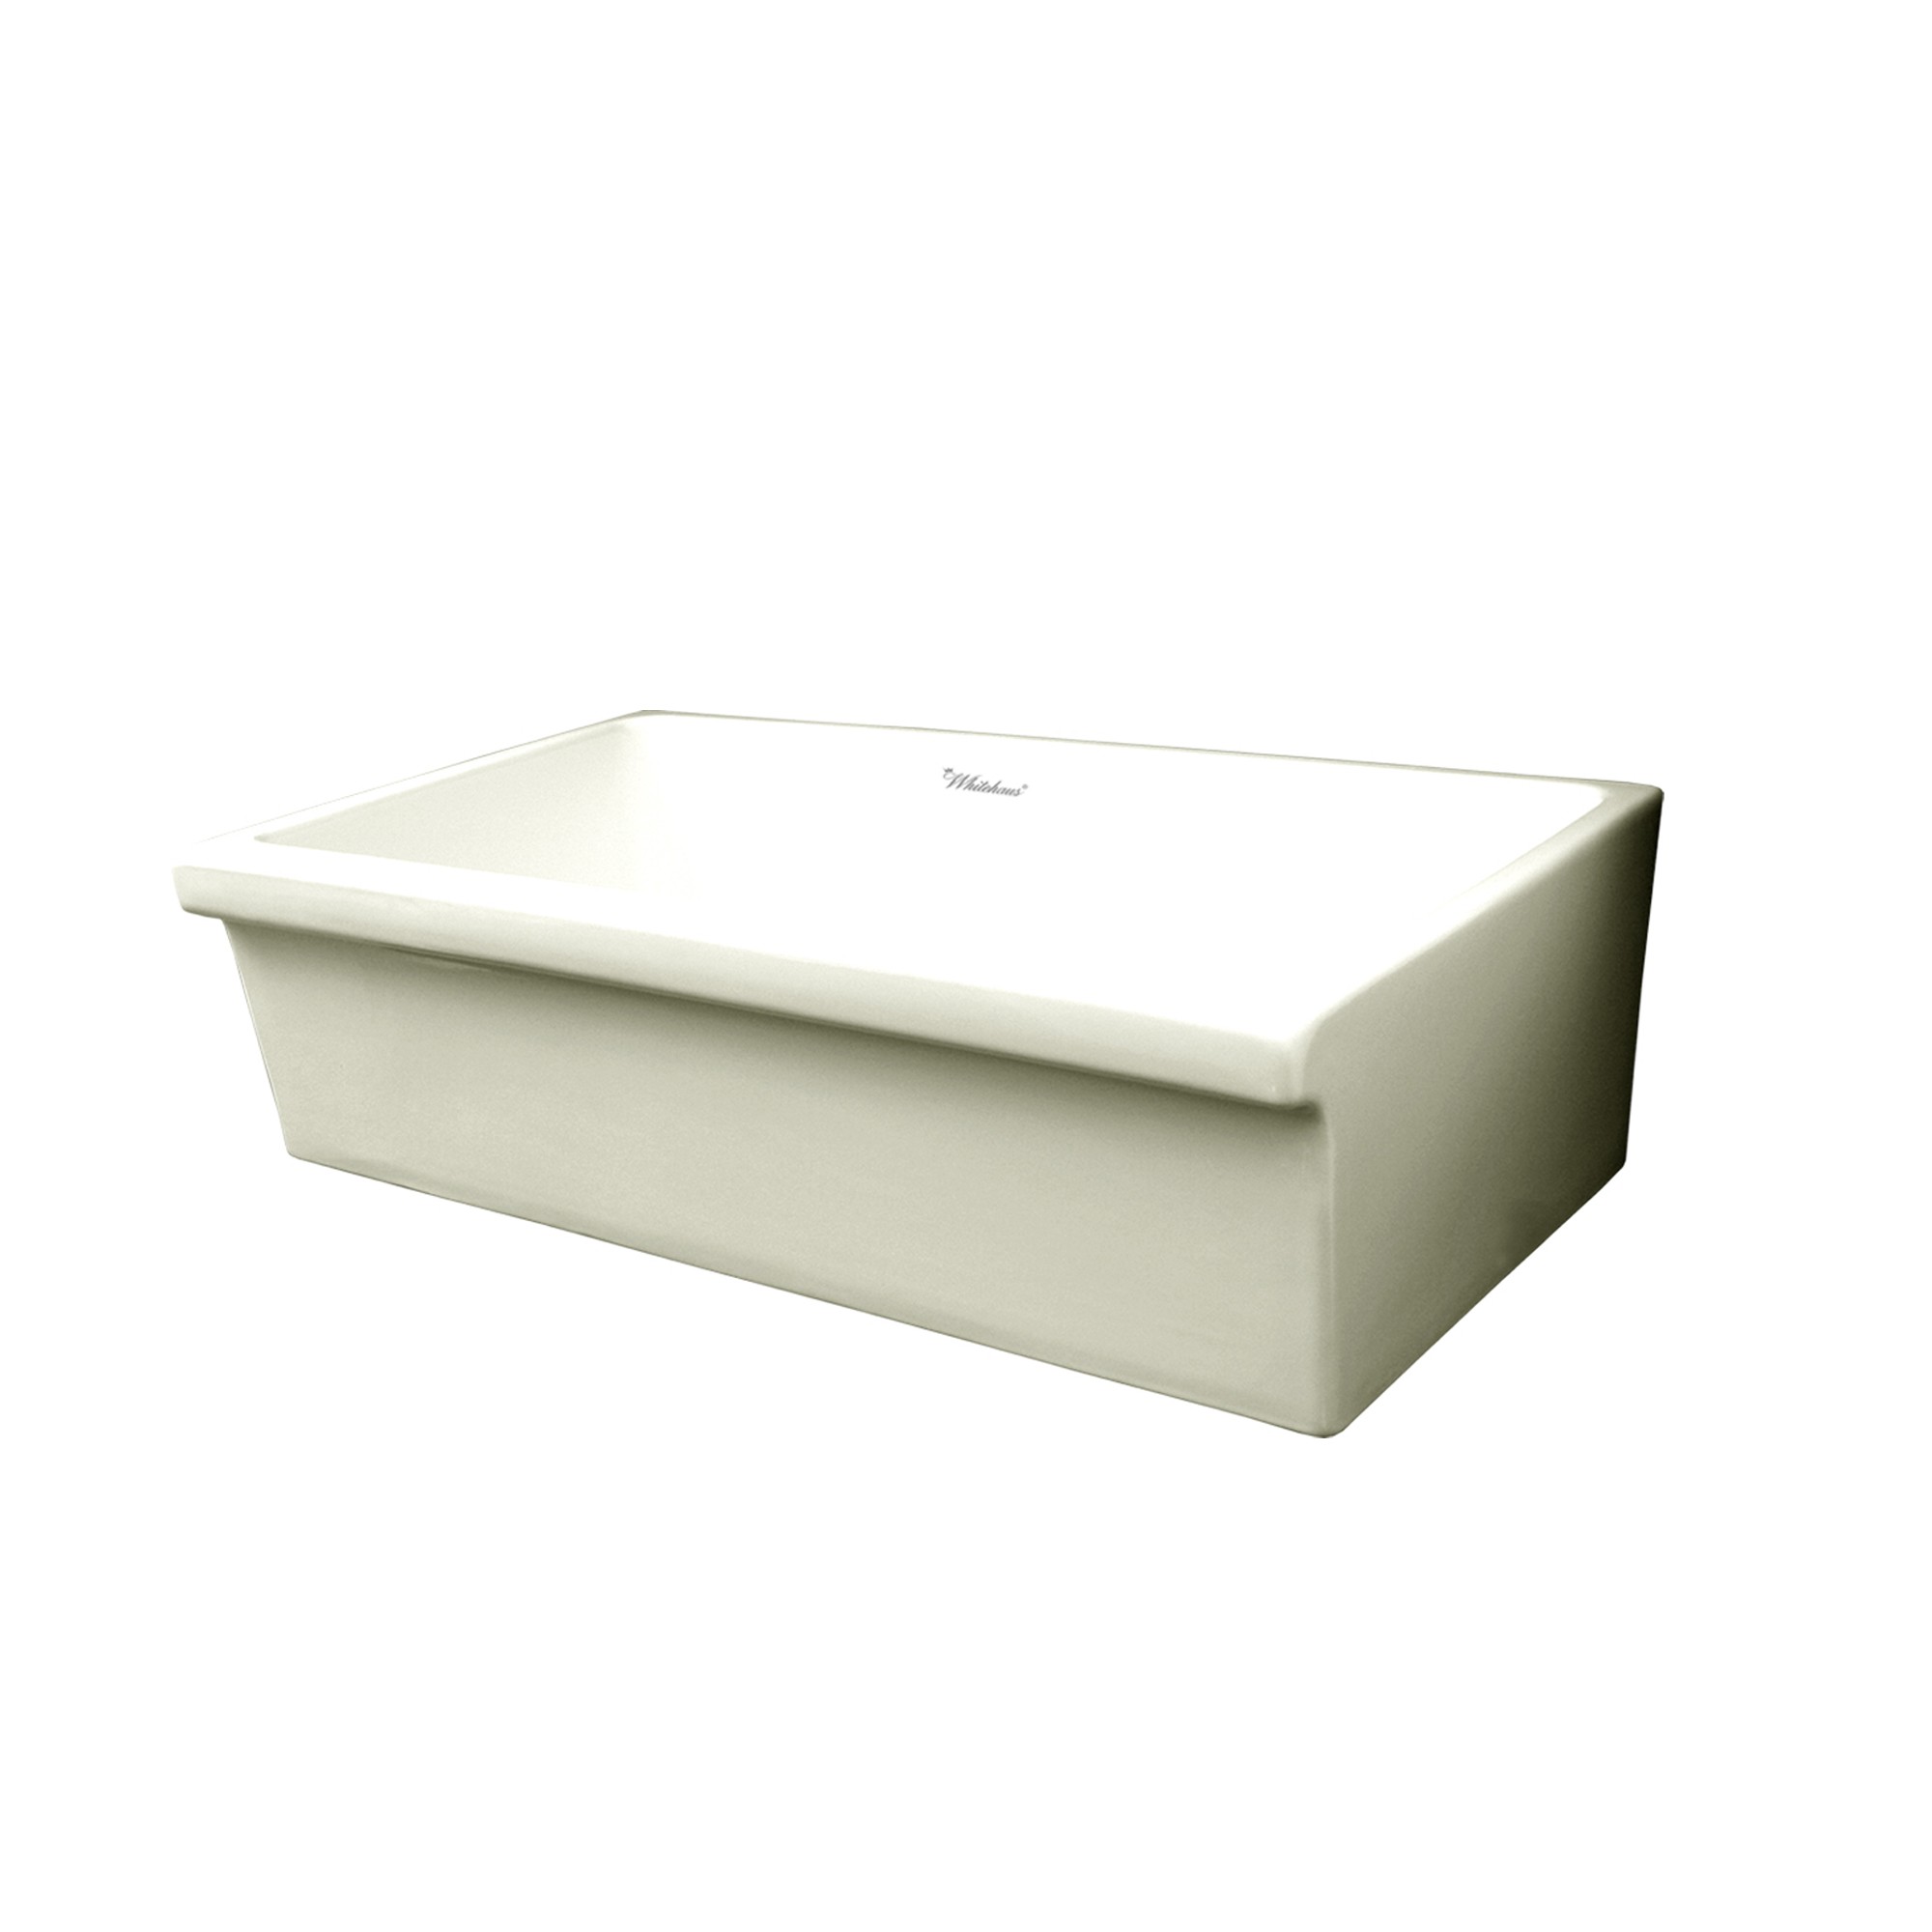 Farmhaus Fireclay Quatro Alcove Large Reversible Sink with Decorative 2 +" Lip on One Side and 2" Lip on the Opposite Side